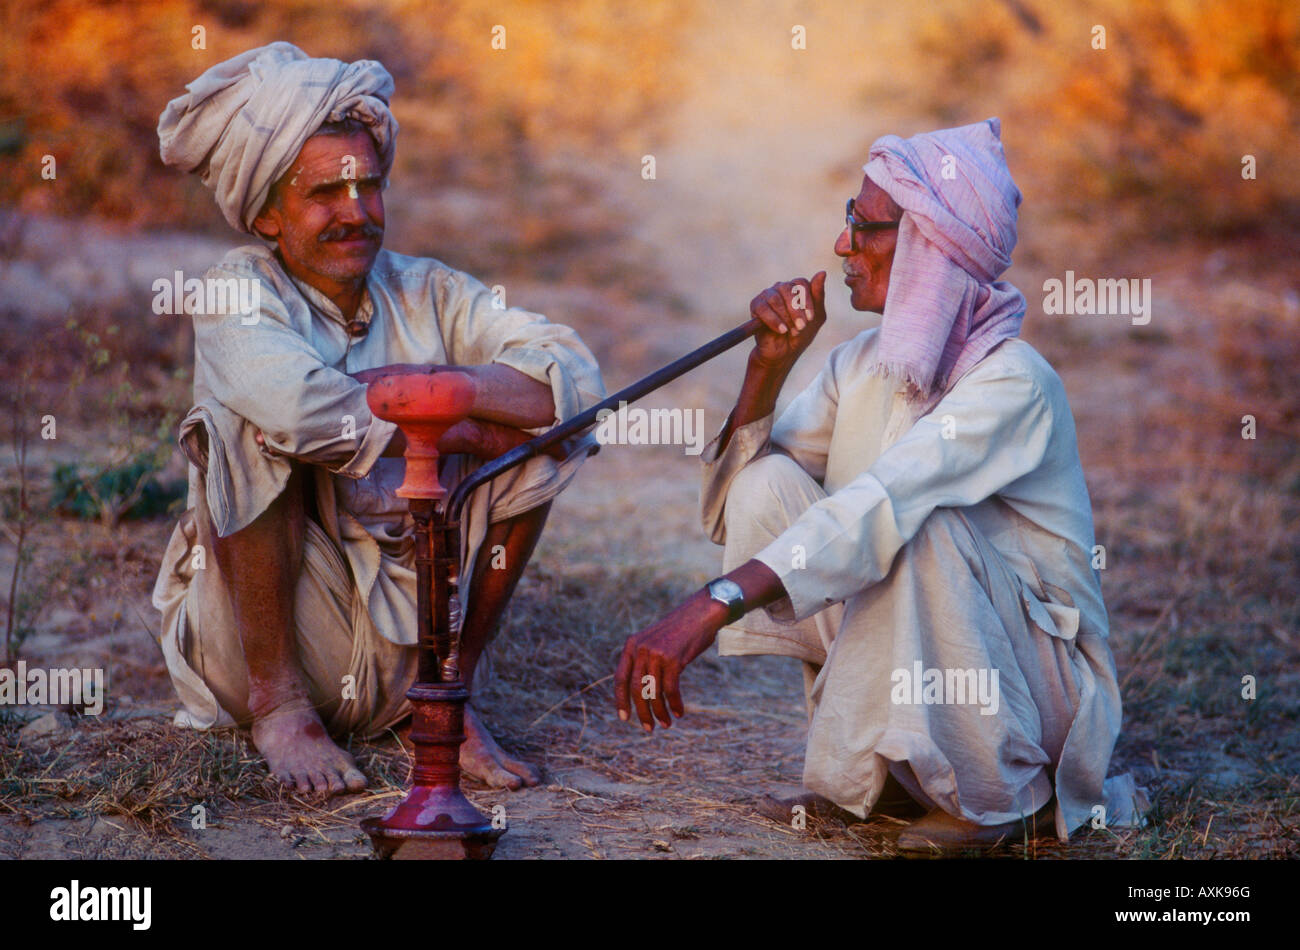 Two Indian men enjoying smoking a opium pipe together at the end of the day at dusk in the countryside near Delhi India Stock Photo